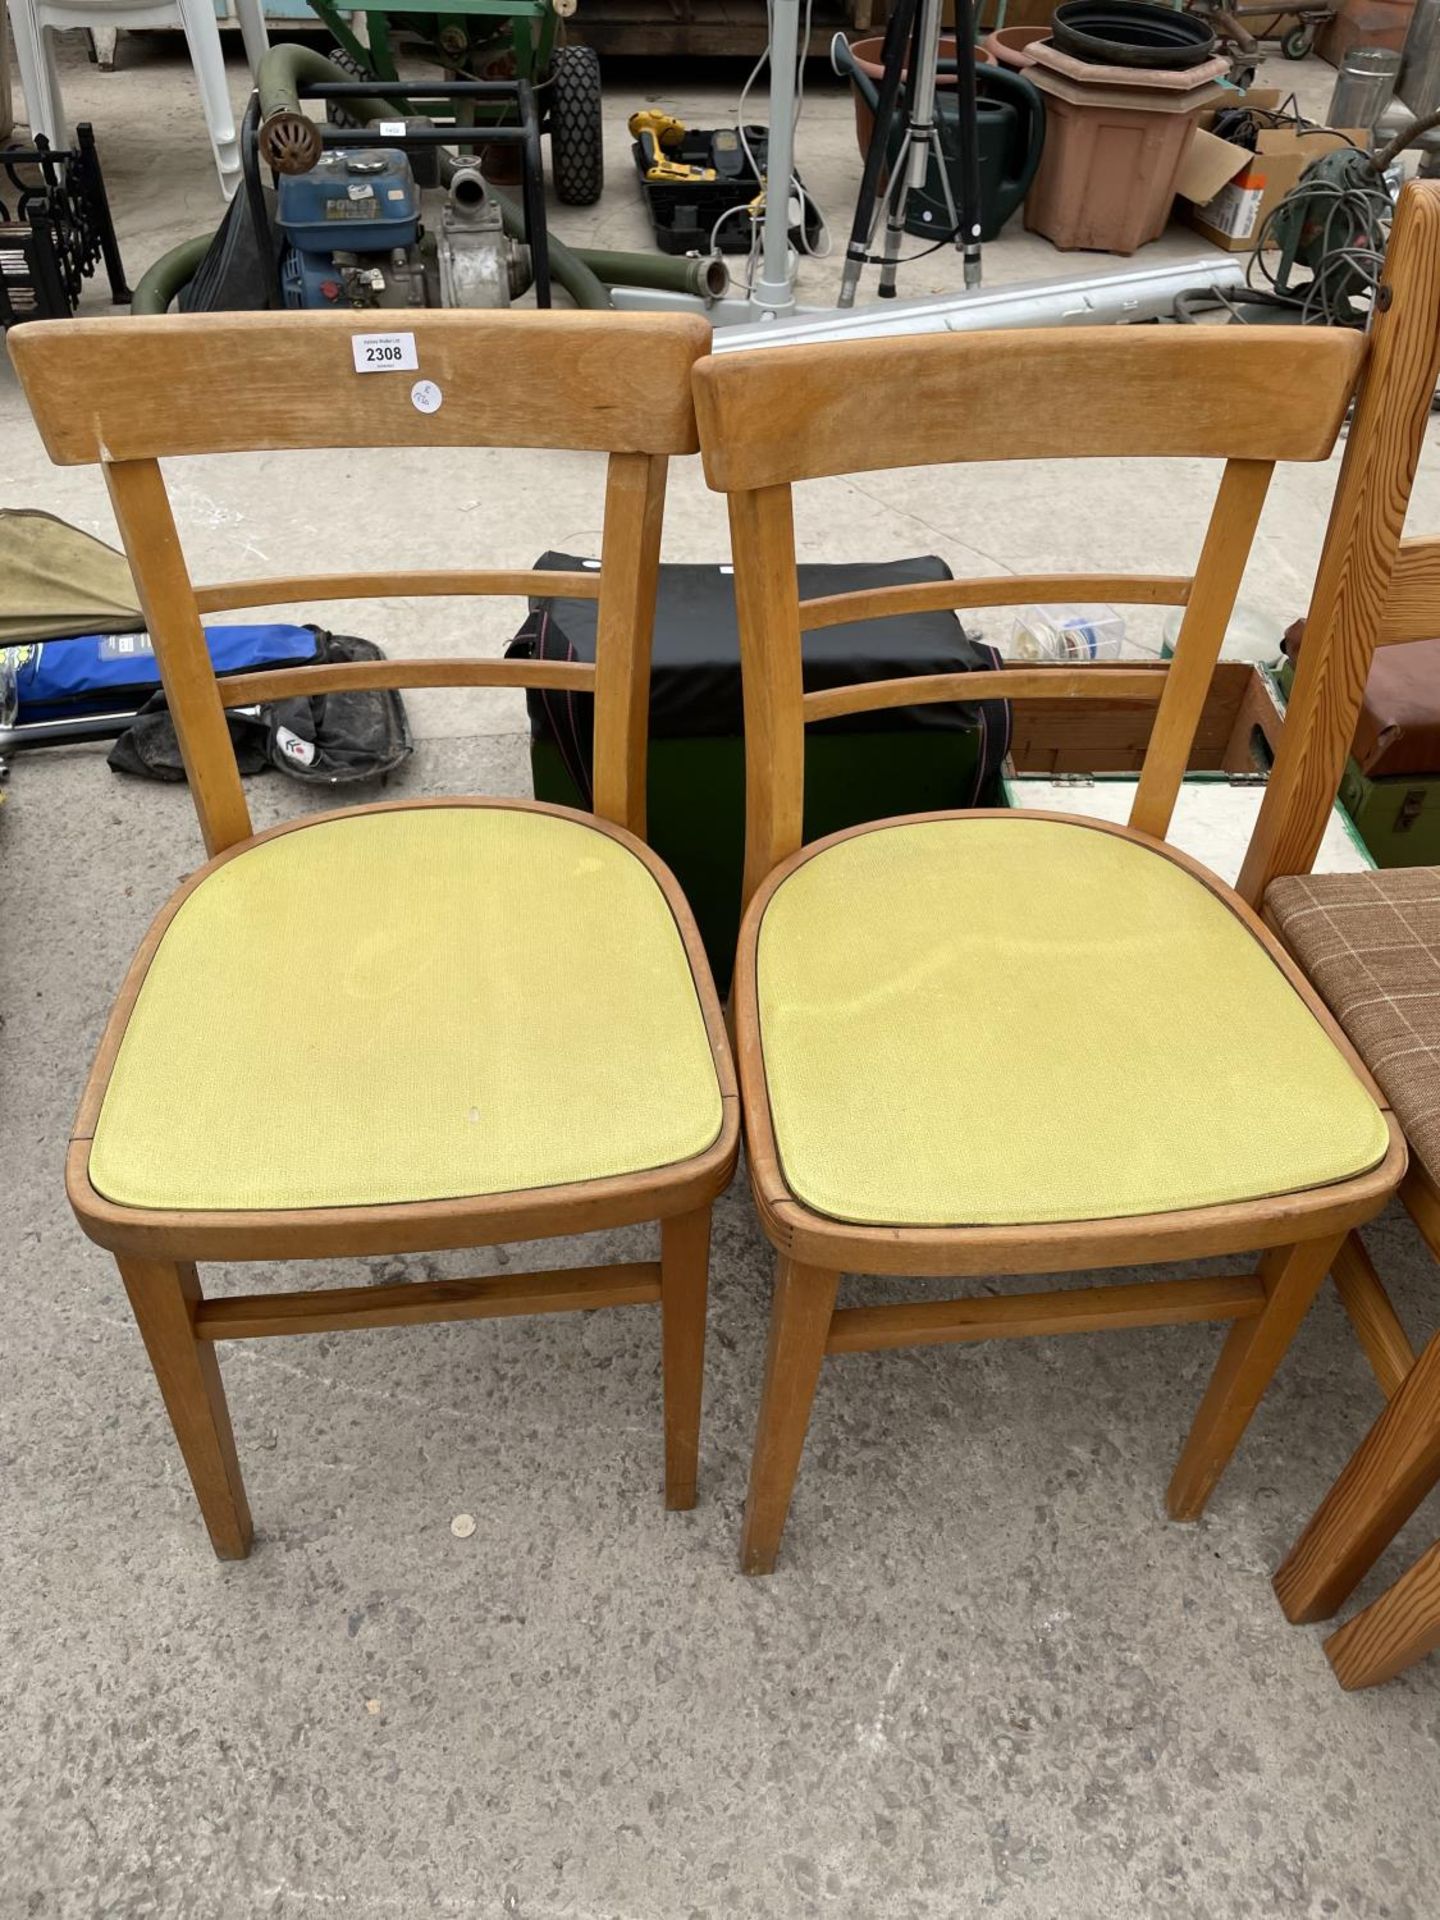 THREE MID 20TH CENTURY KITCHEN CHAIRS AND A STOOL - Image 4 of 4